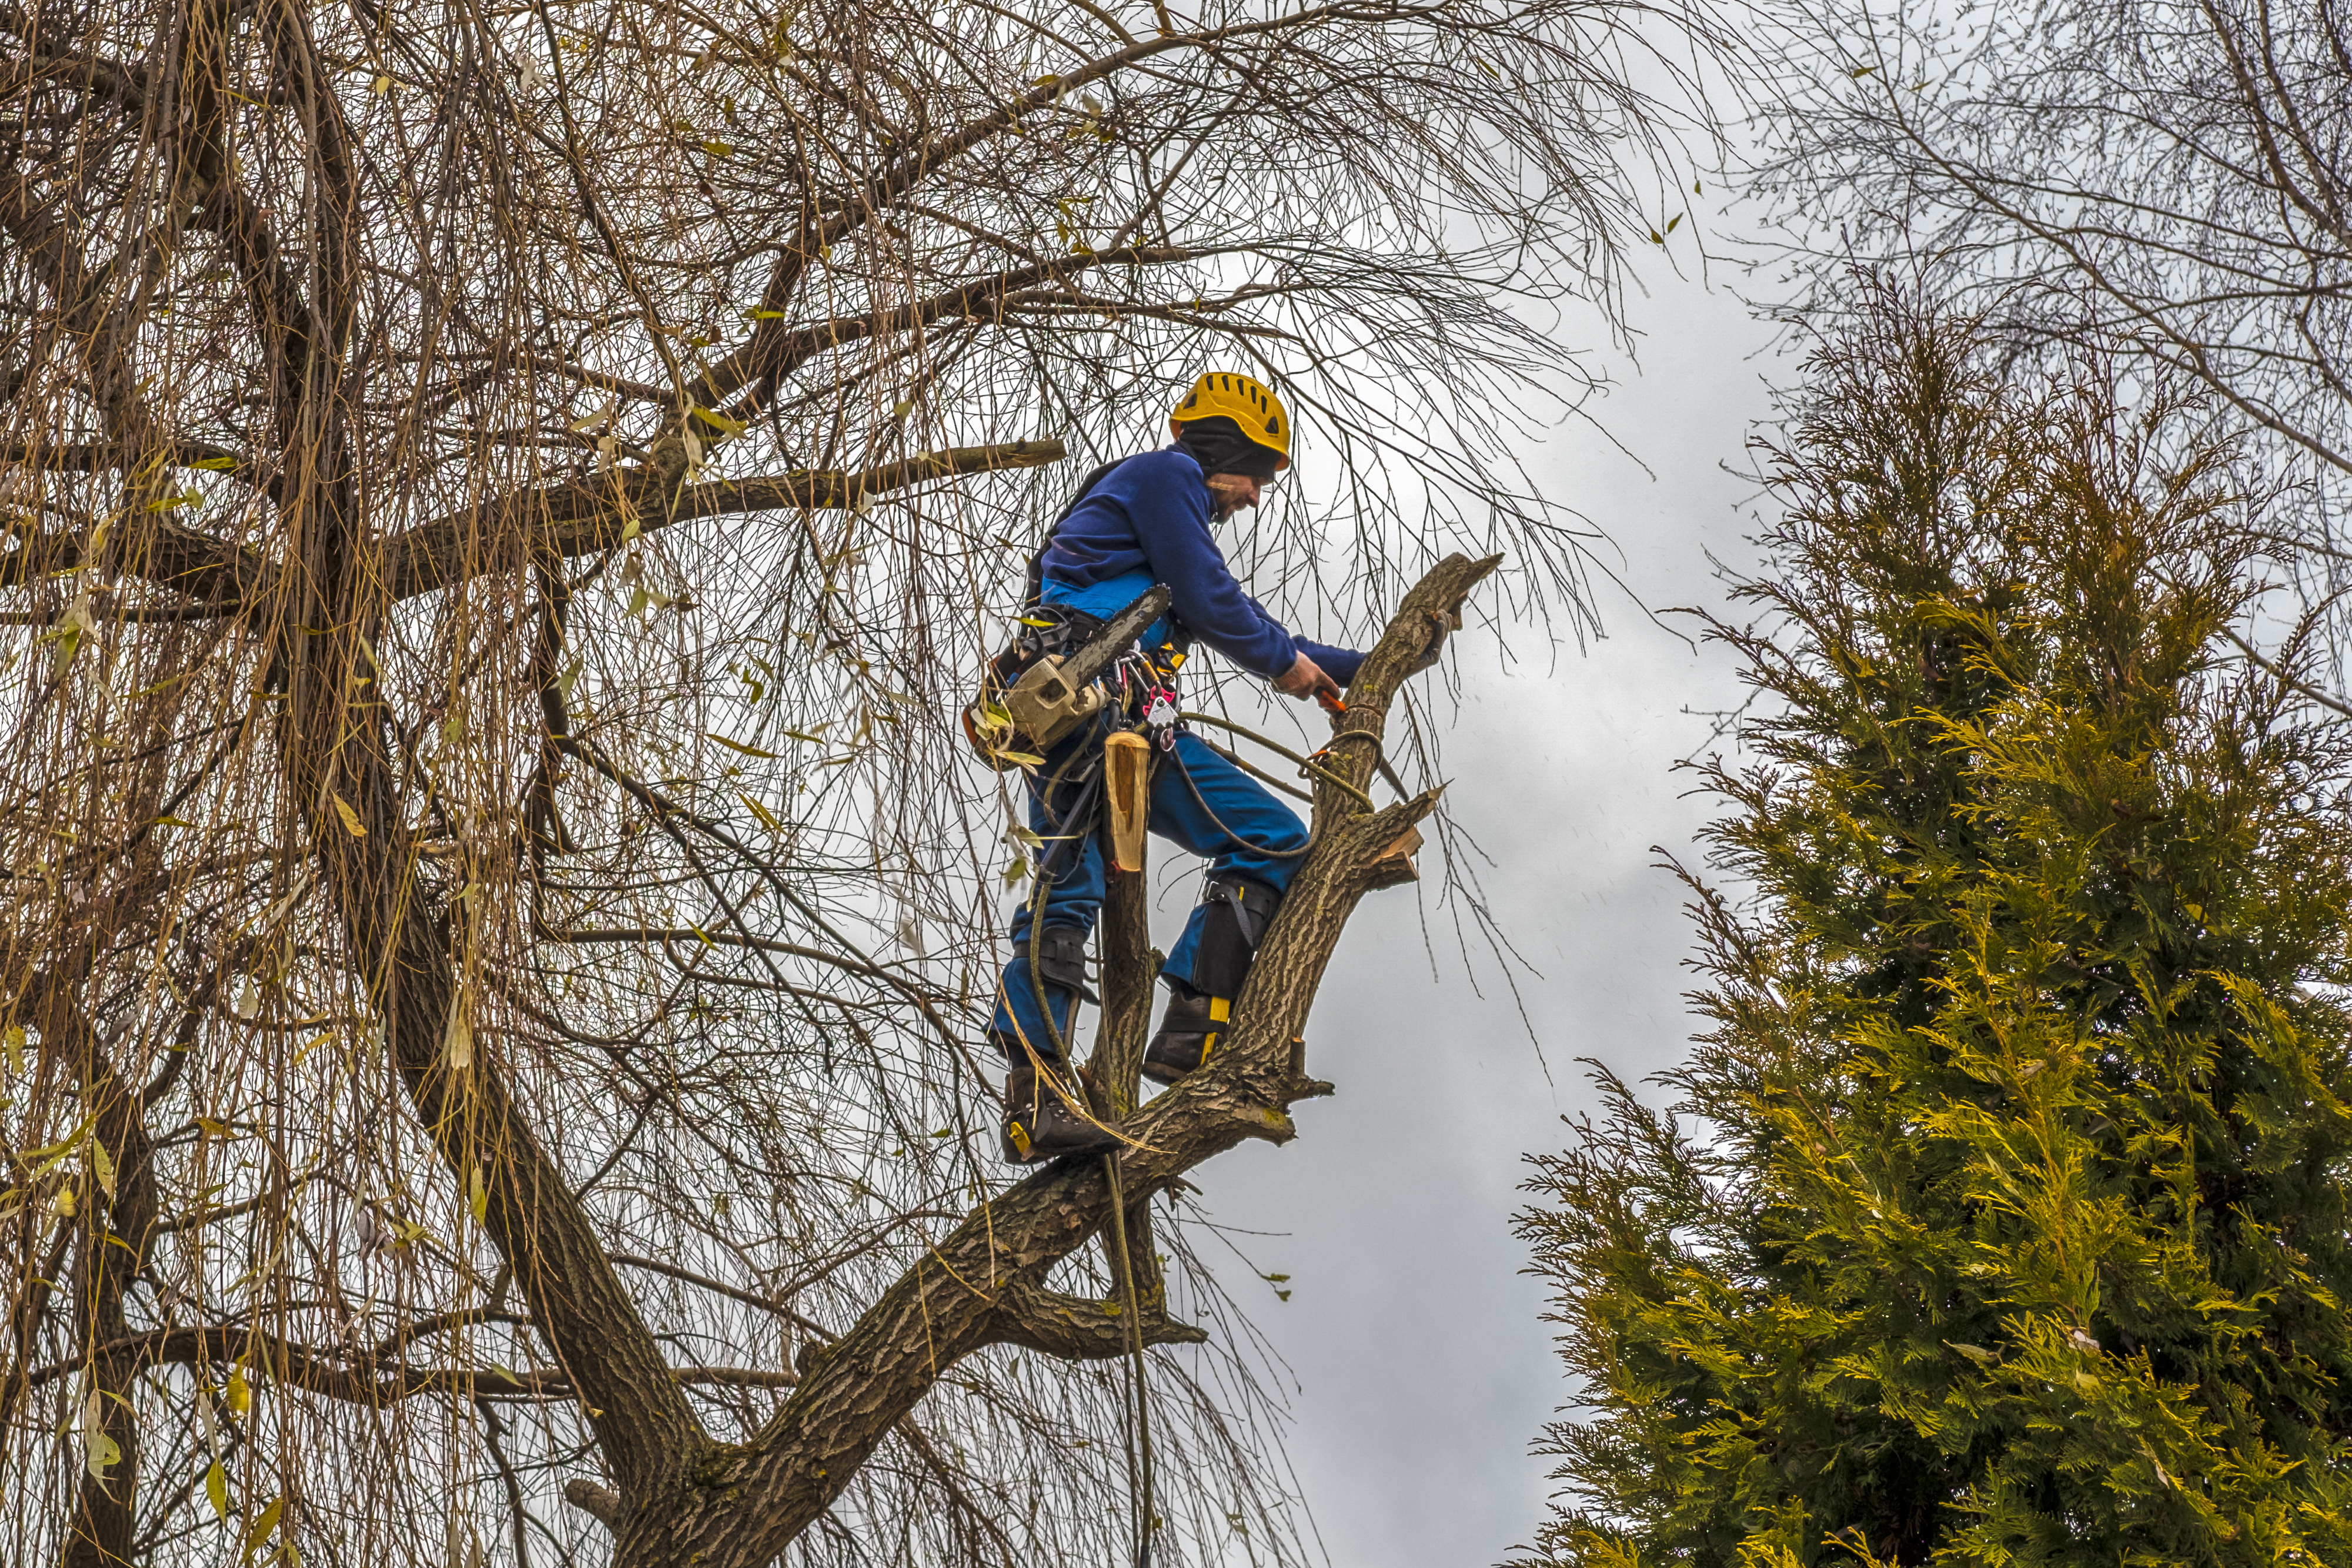 Person in tree, cutting down limbs and branches